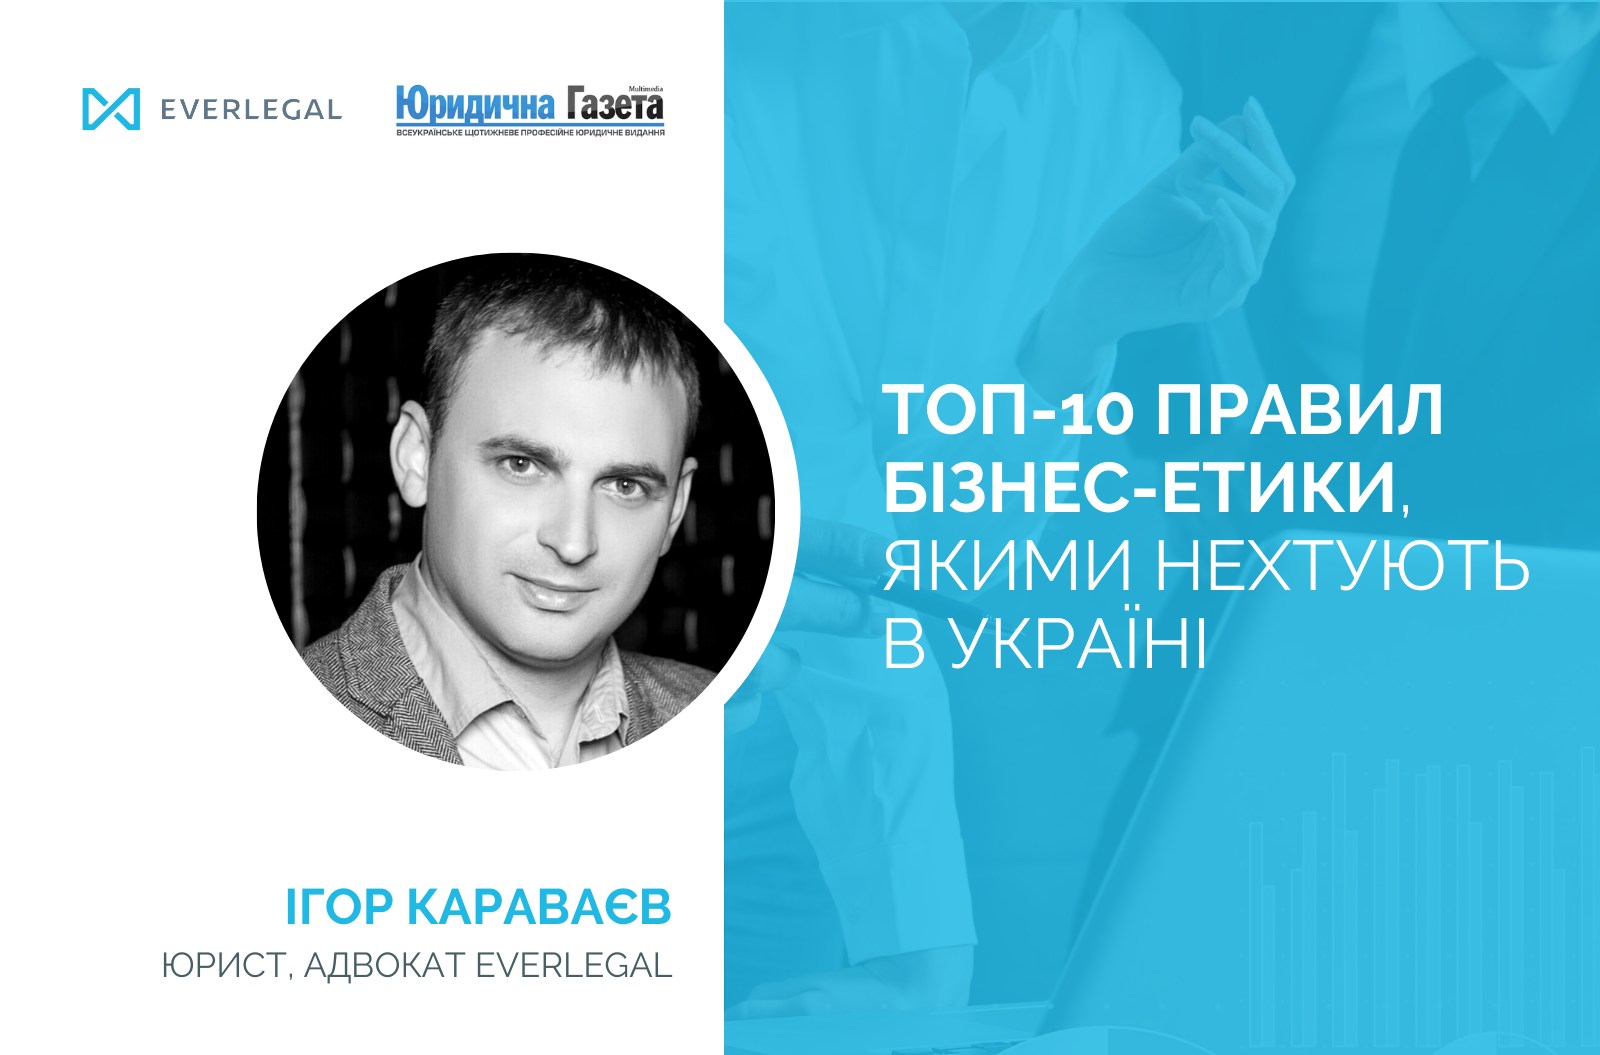 TOP-10 rules of business ethics, which are neglected in Ukraine